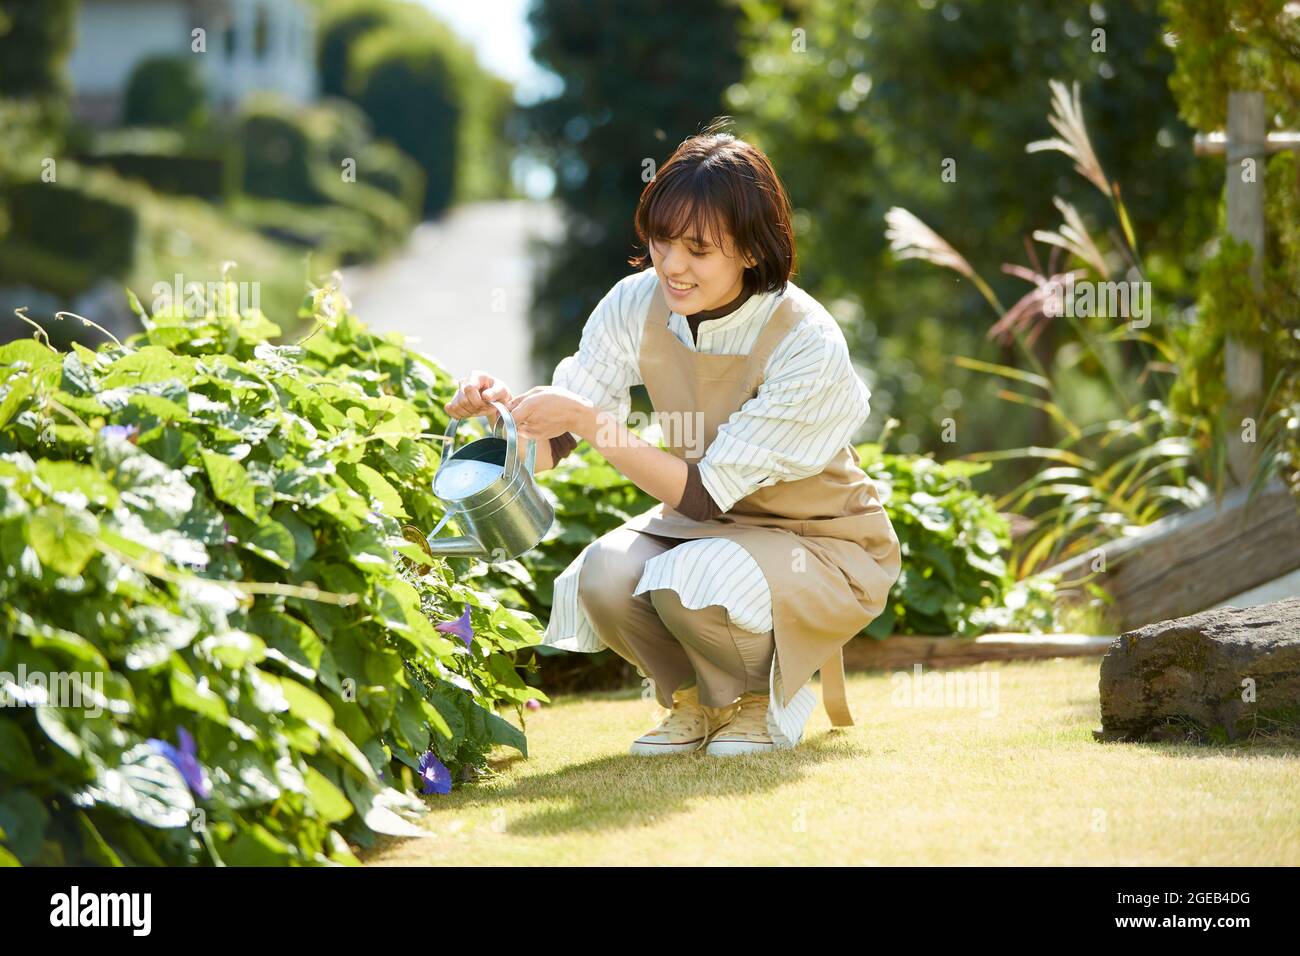 Japanese woman working in the garden Stock Photo